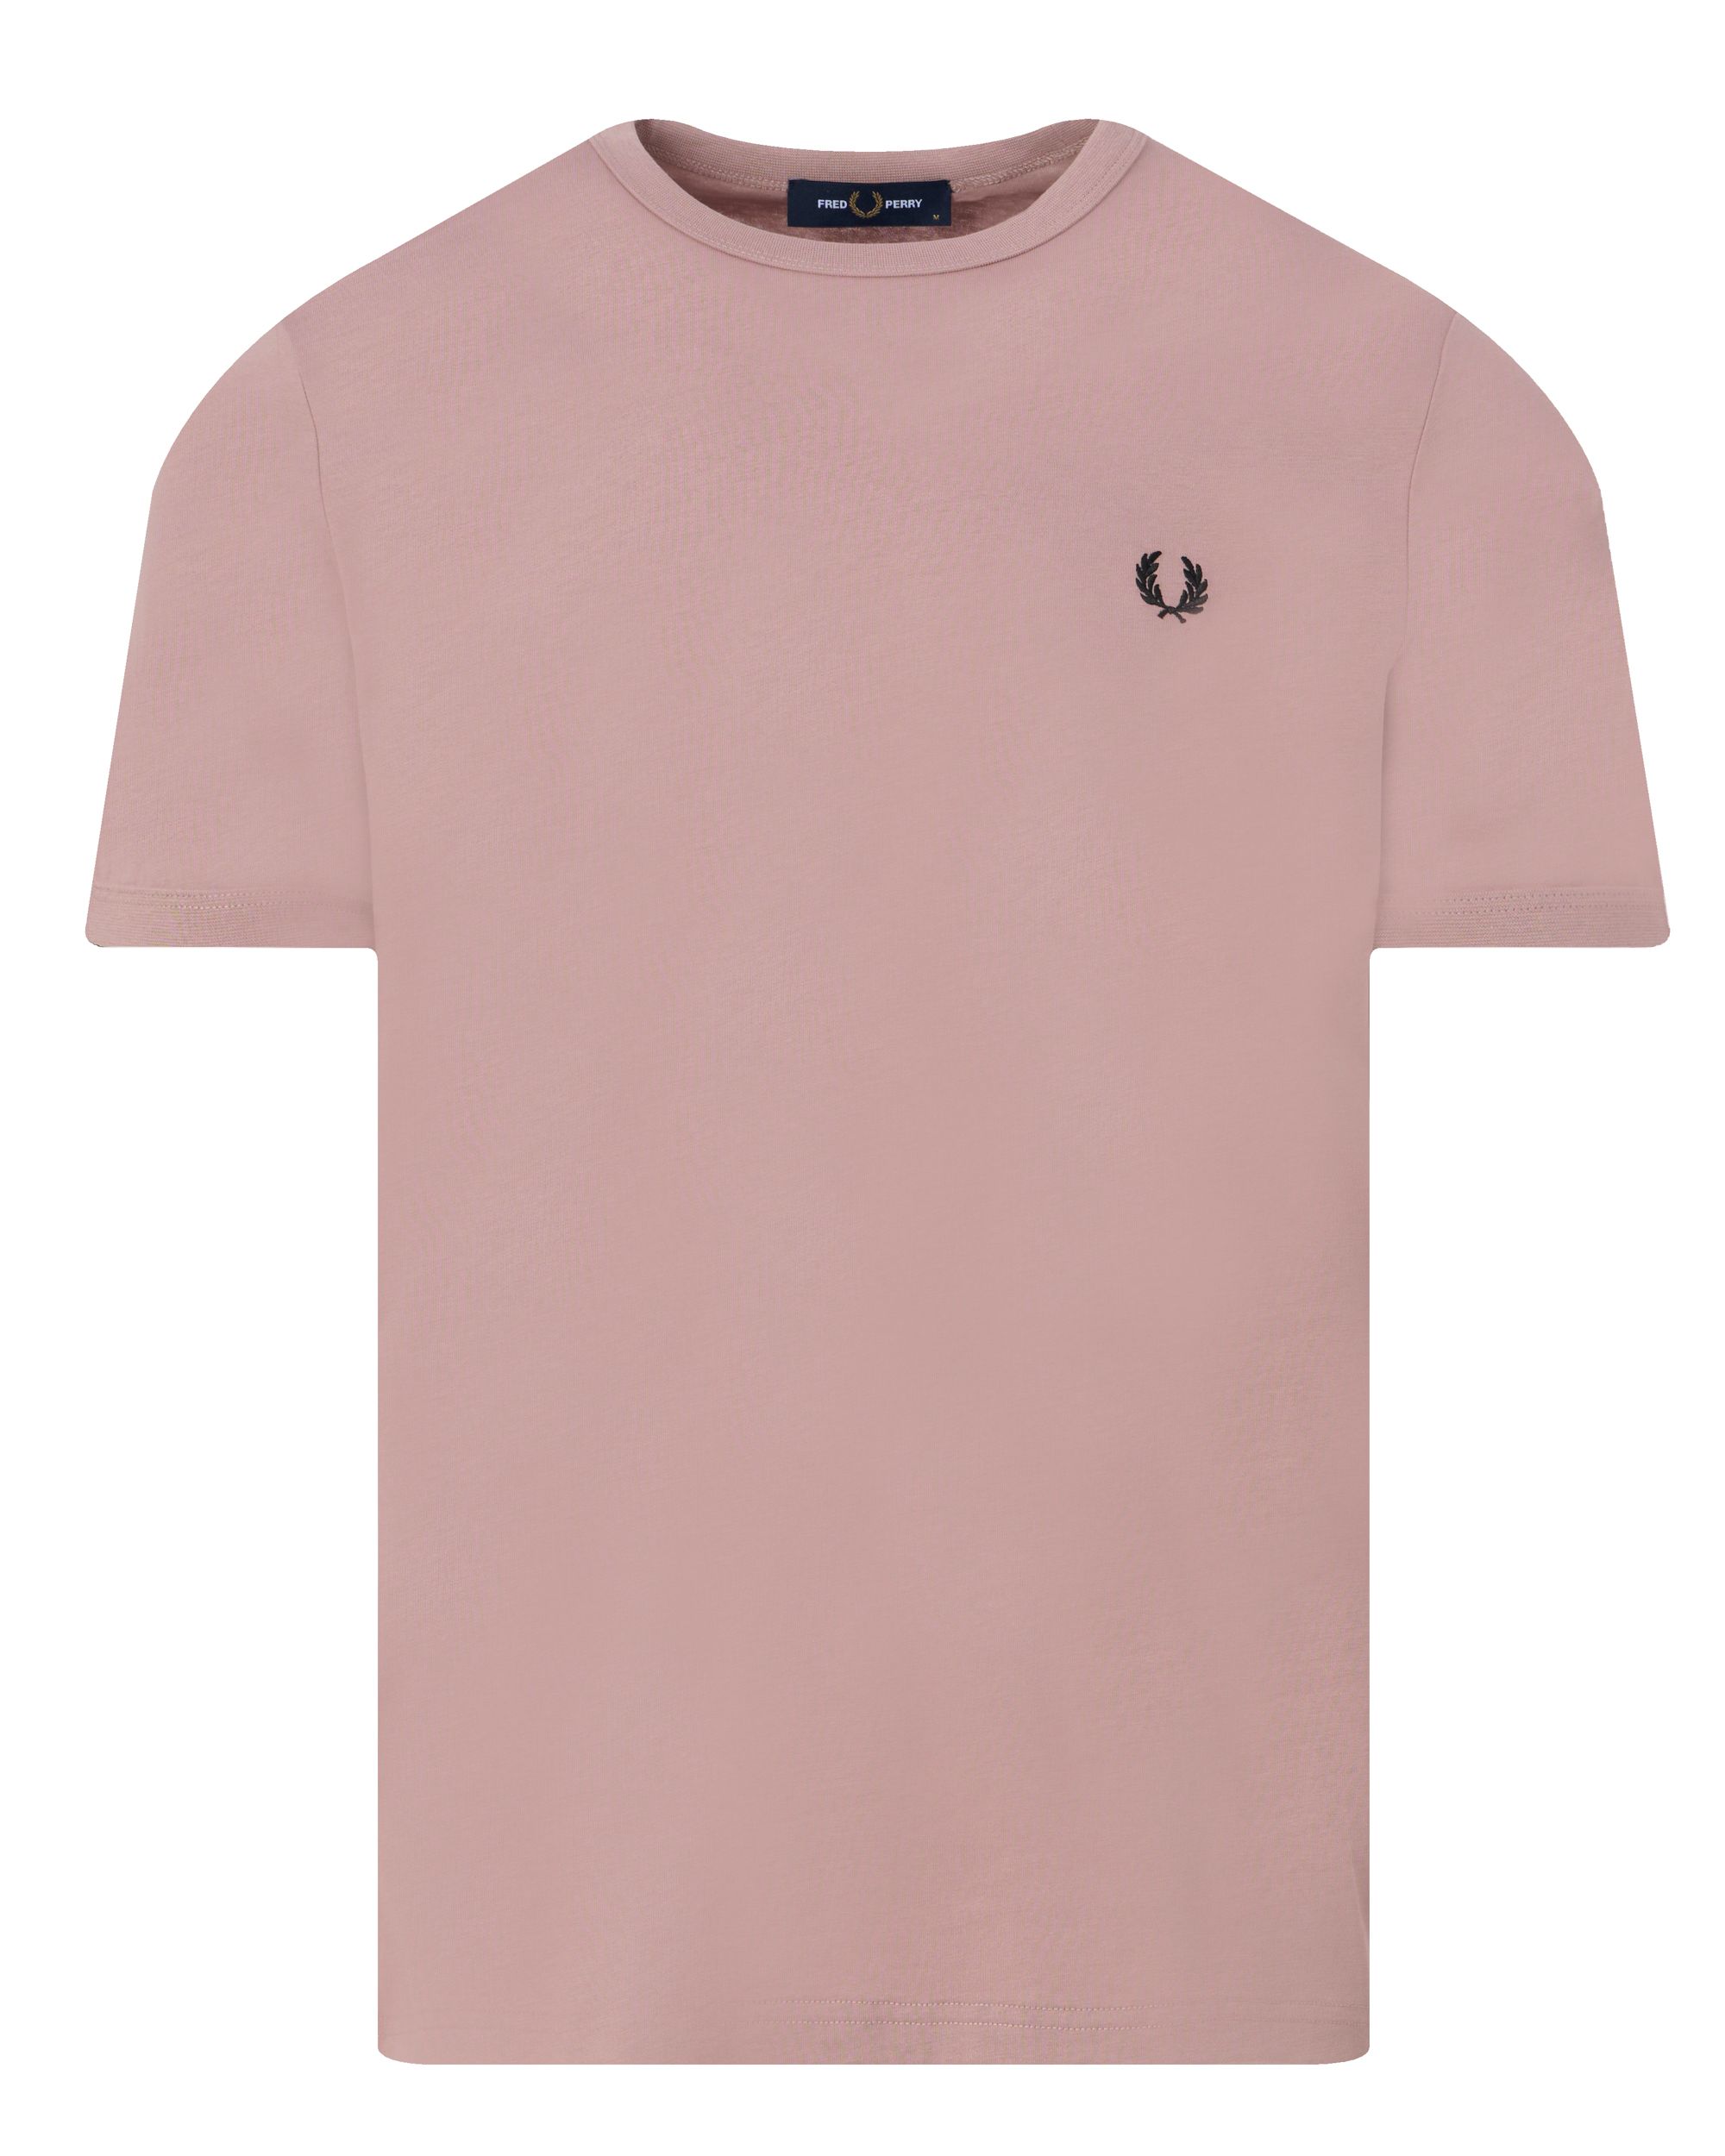 Fred Perry T-shirt KM Roze 091946-001-L